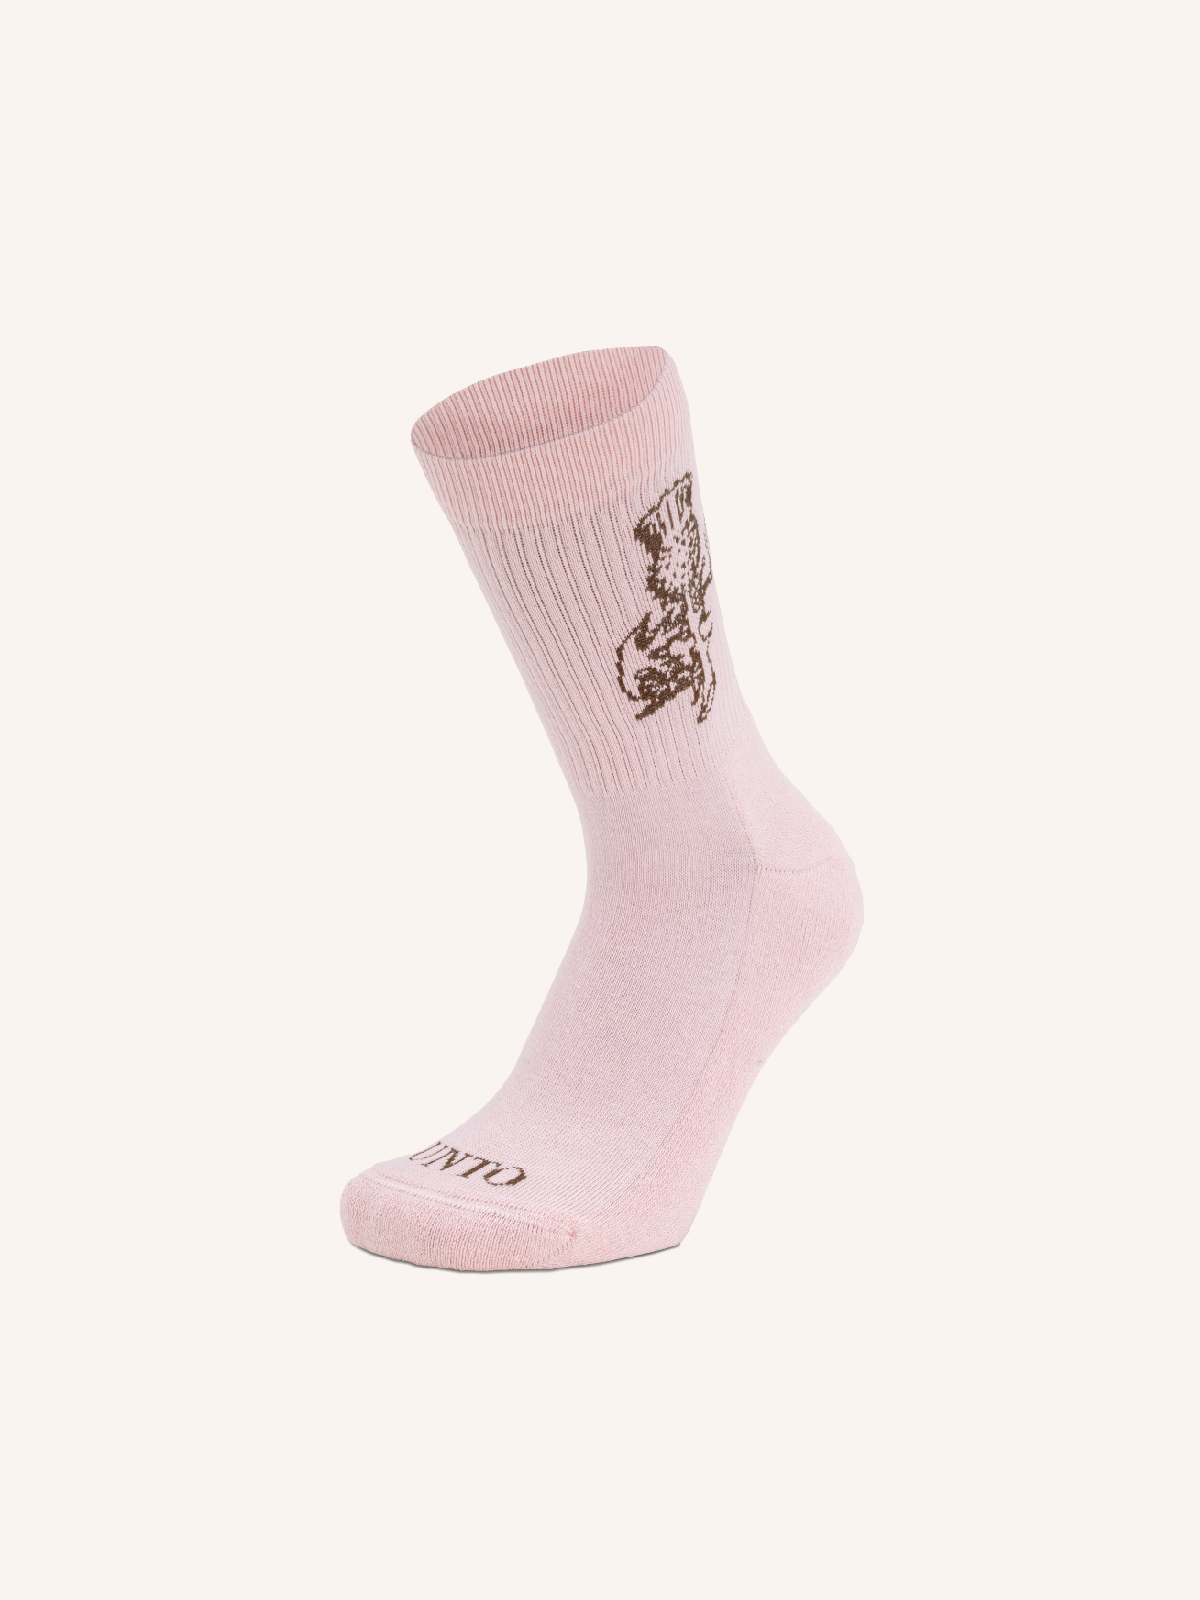 Short Terry Socks with Thistle Embroidery for Women | Fantasy | Pack of 3 Pairs | Iconic DC